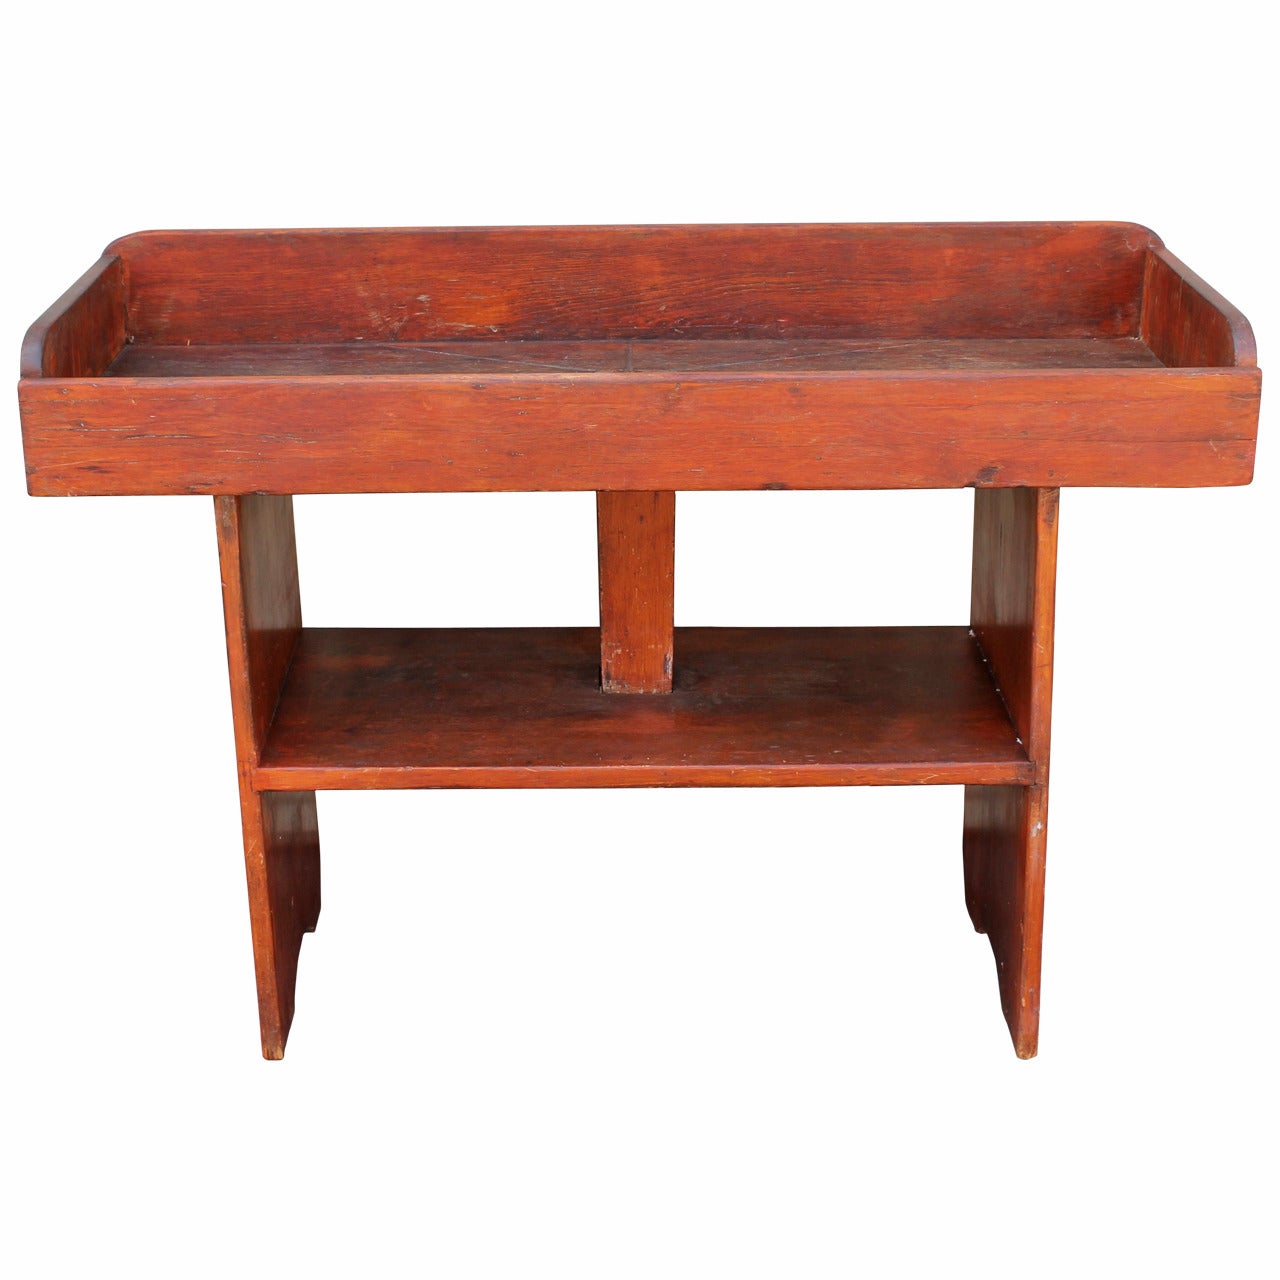 19th Century Dry Sink or Bench from Pennsylvania